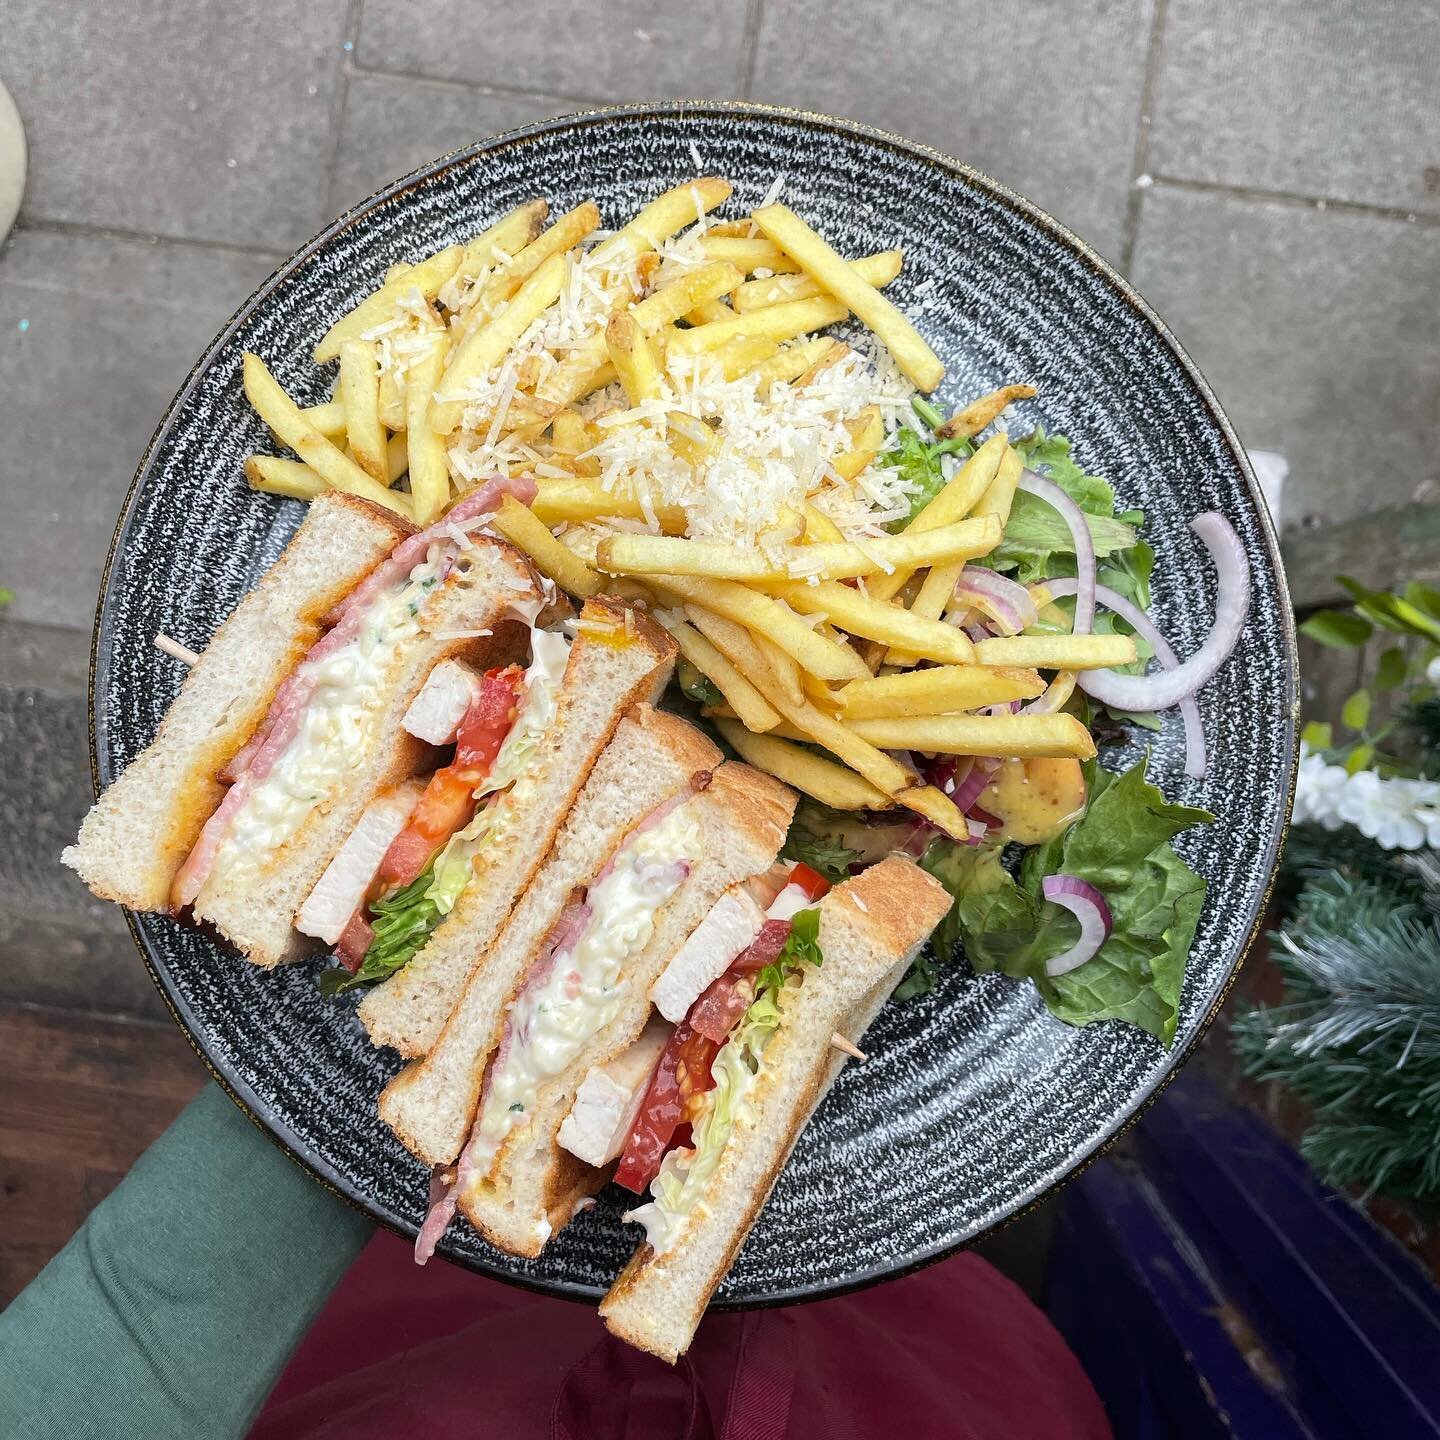 A classic at Aubergine is our club sandwich! Roasted chickens, smoked streaky bacon, cheese + onion mayonnaise, lettuce and tomato served between three slices of bloomer. How delicious does it look! #clubsandwich #cafe #independent #westkirby #westki